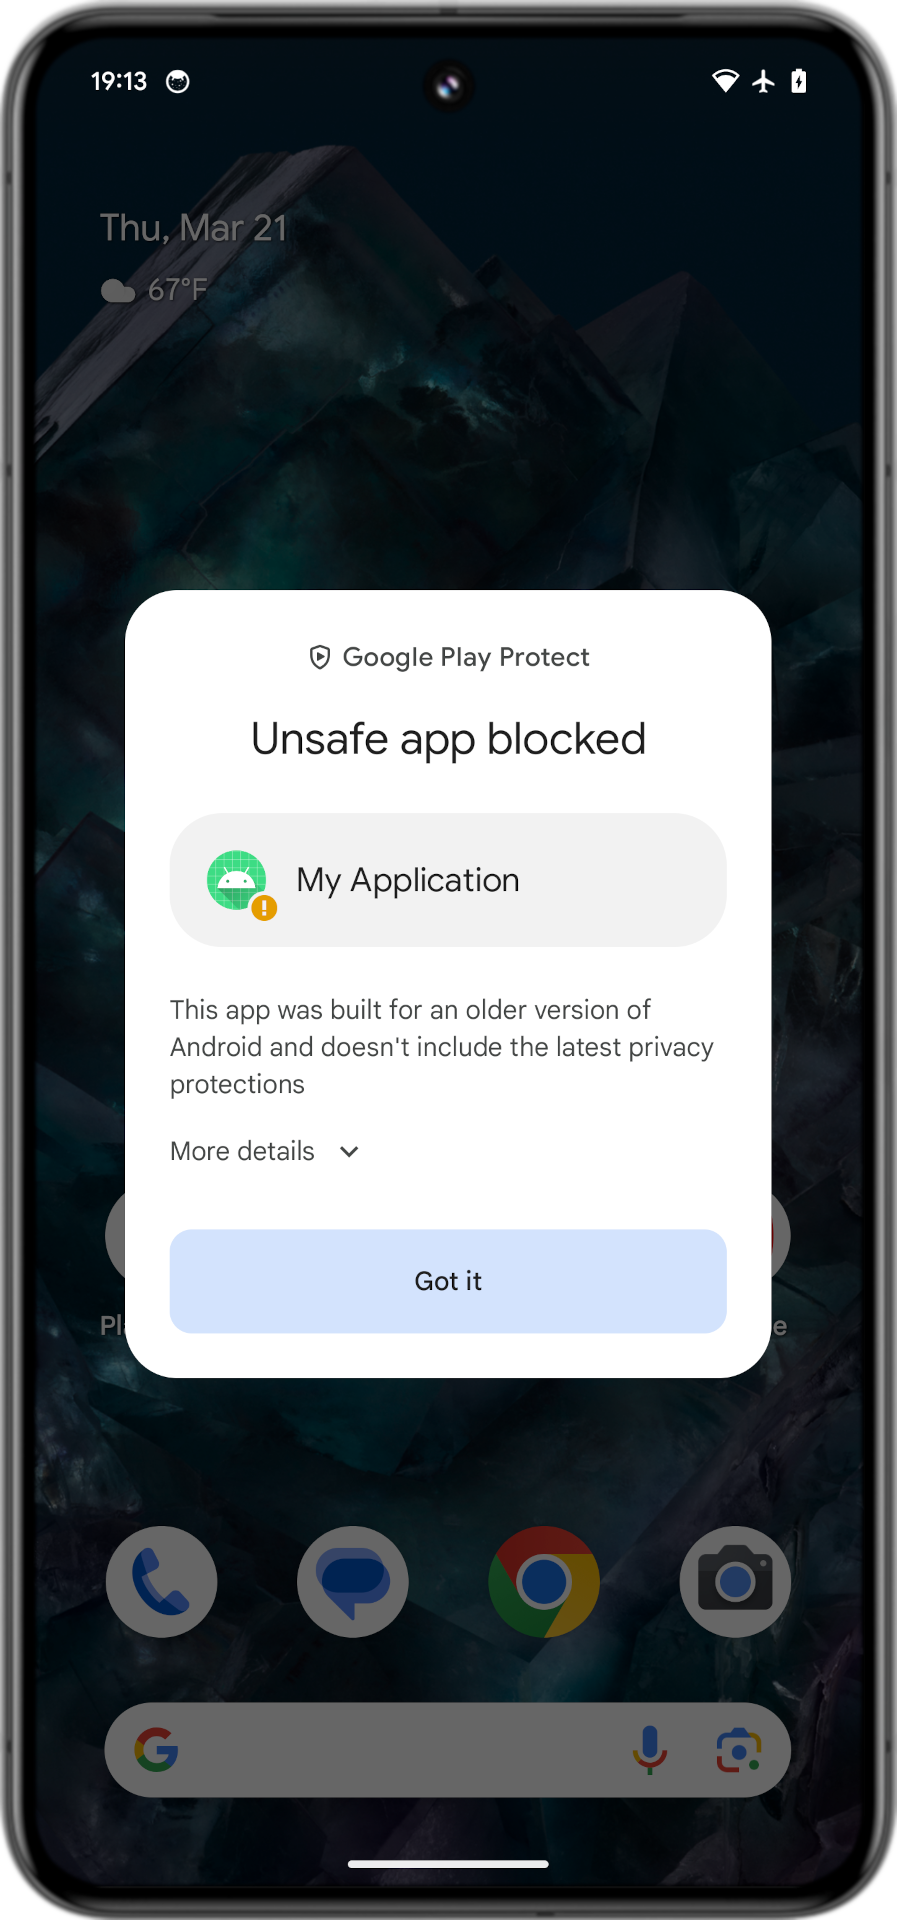 Screenshot showing the Google Play Protect "Unsafe app blocked" dialog when attempting to sideload an app with a lower-than-minimum SDK target